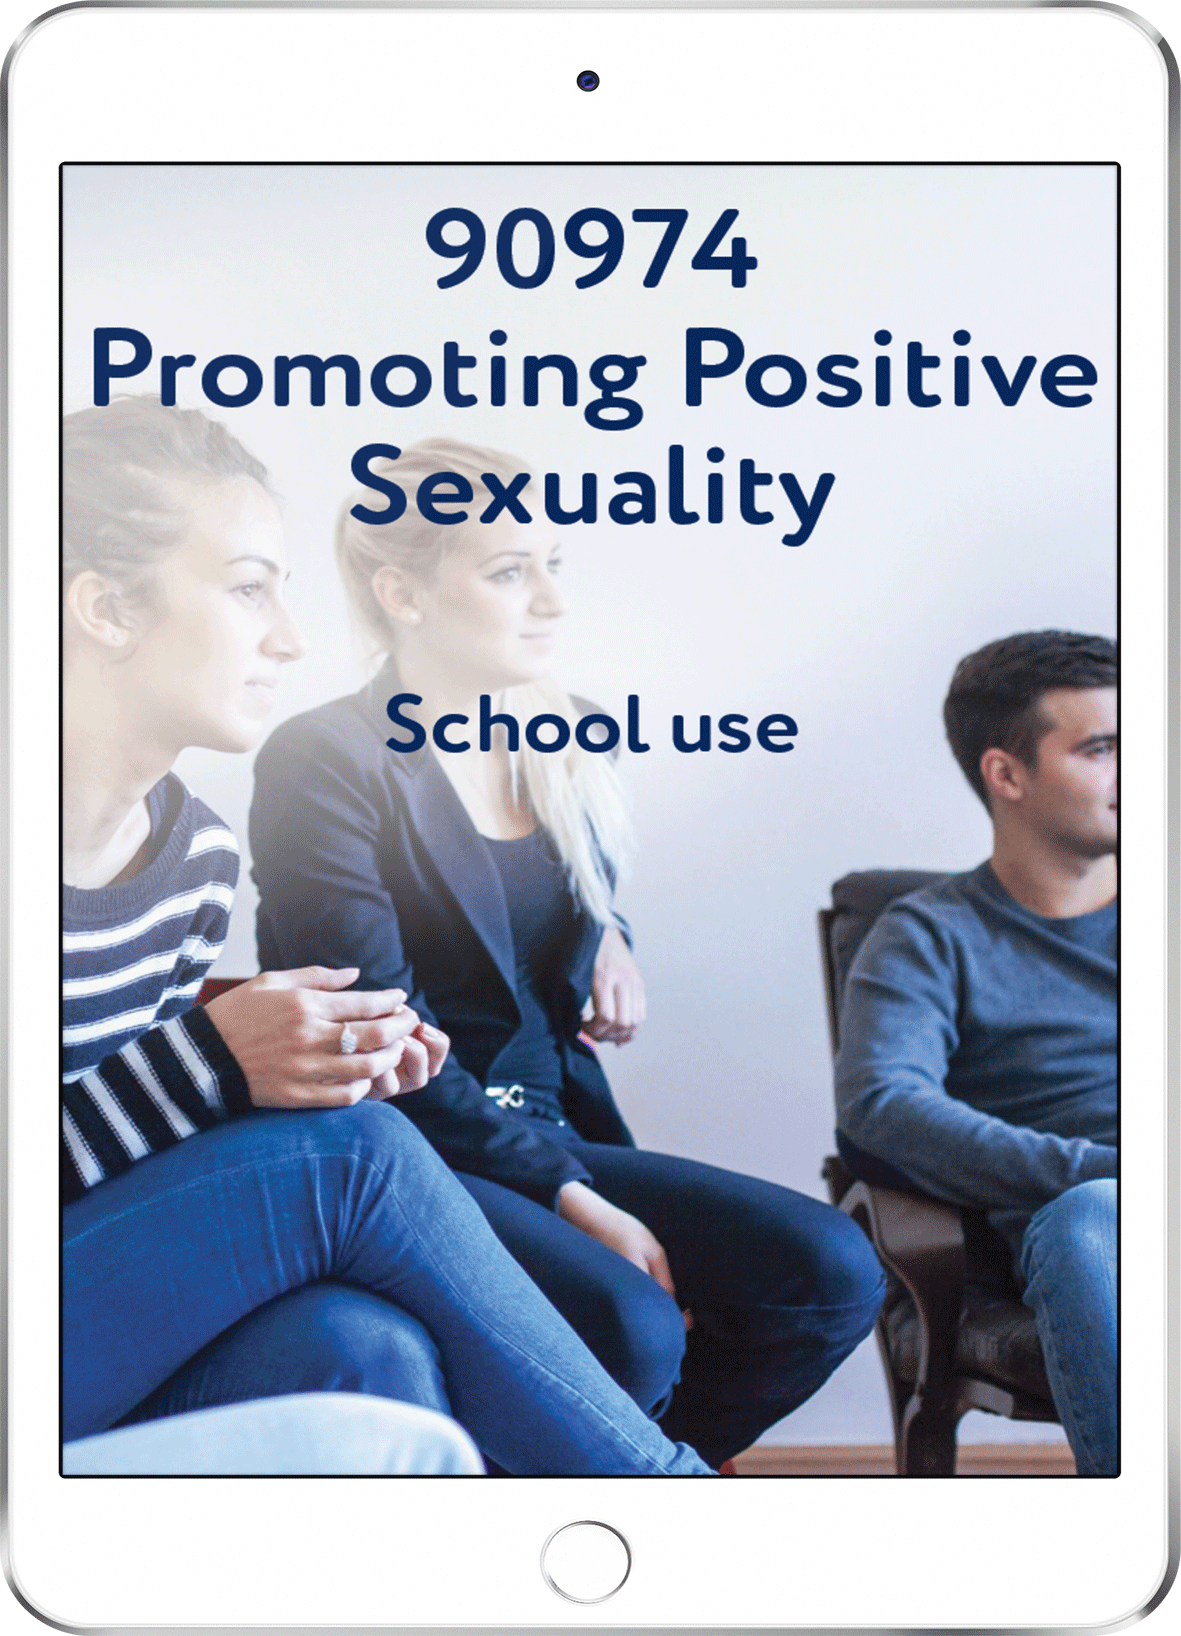 90974 Promoting Positive Sexuality - School Use